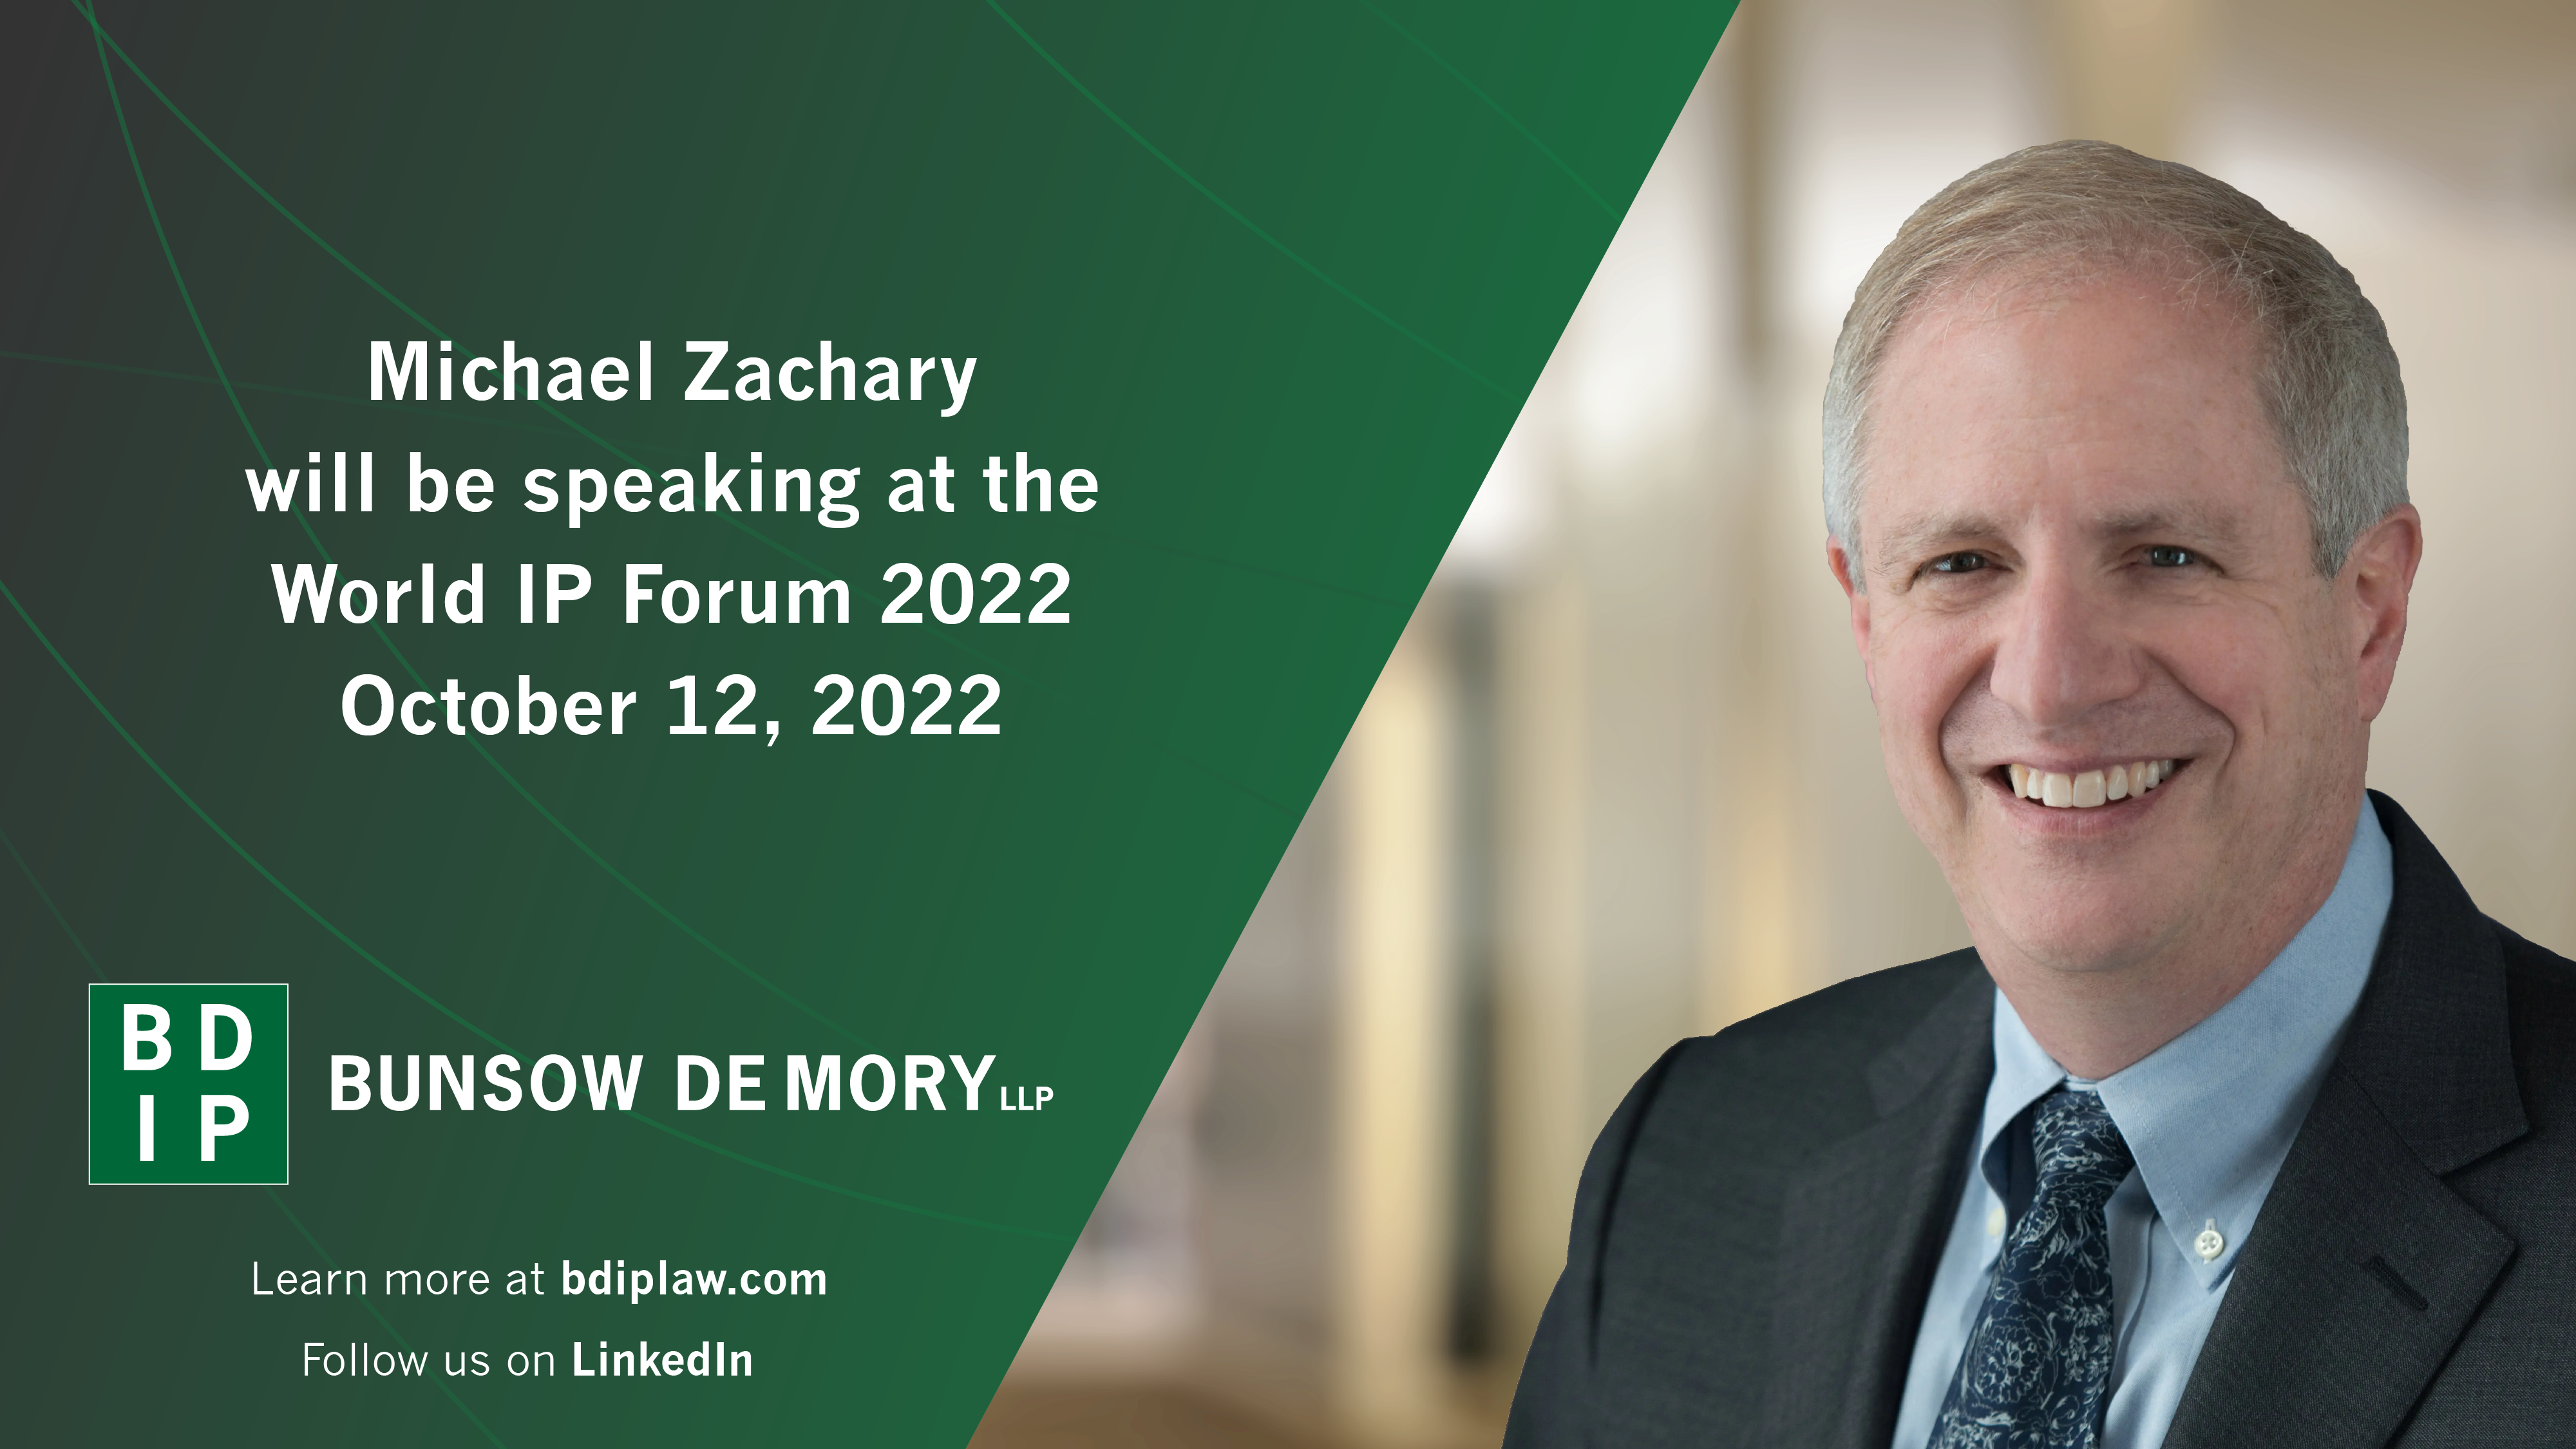 Michael Zachary Speaking at the World IP Forum 2022, October 12, 2022